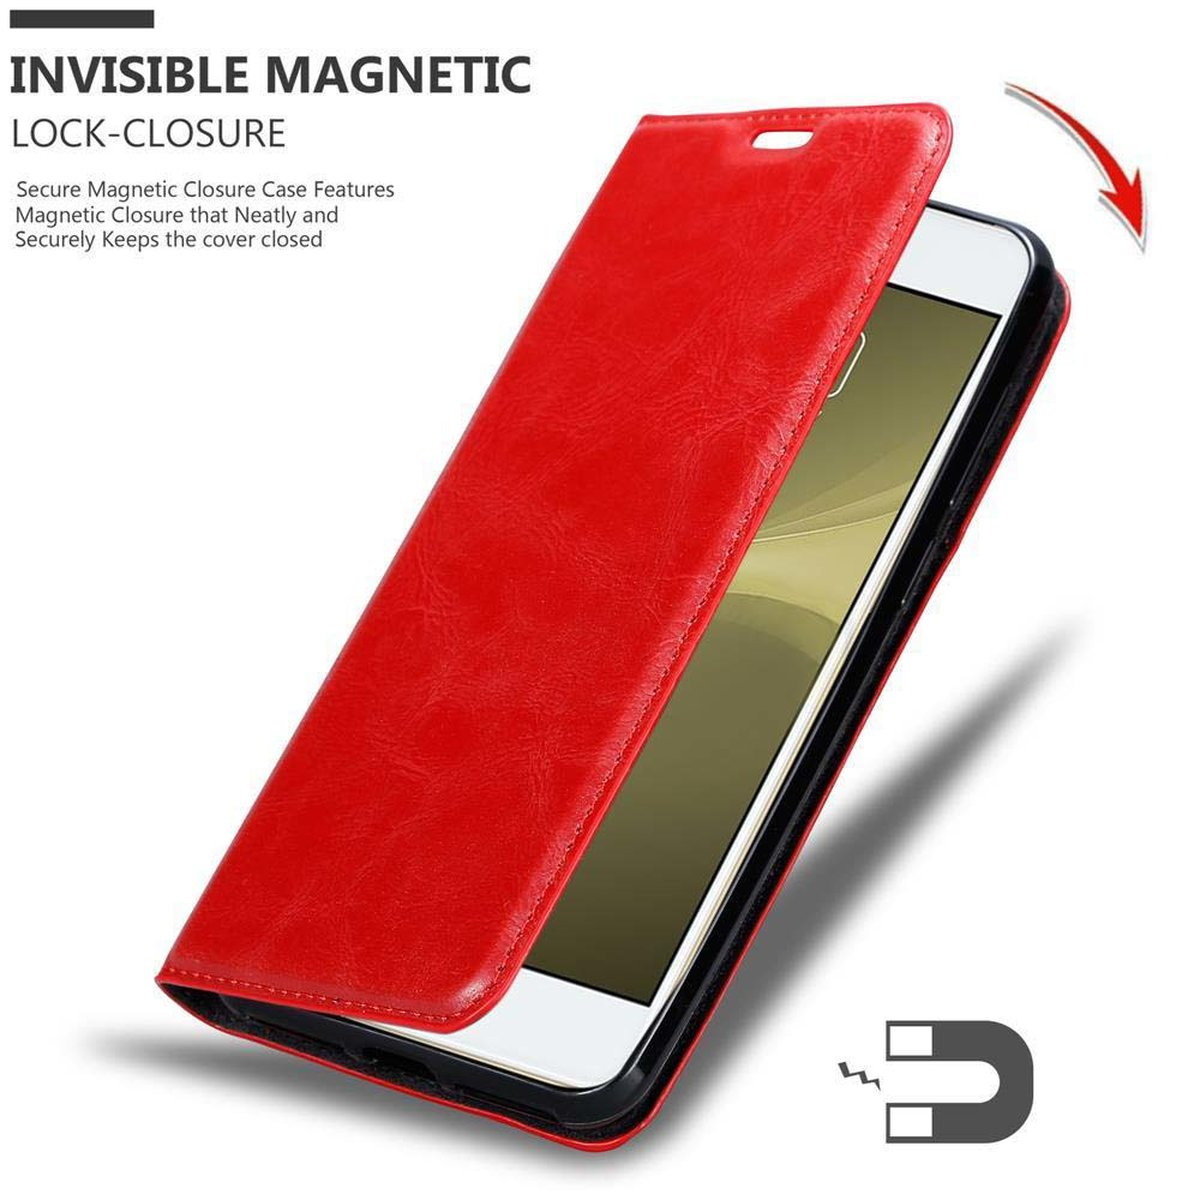 CADORABO Book Hülle Invisible Magnet, Bookcover, Nubia Z11, ZTE, APFEL ROT